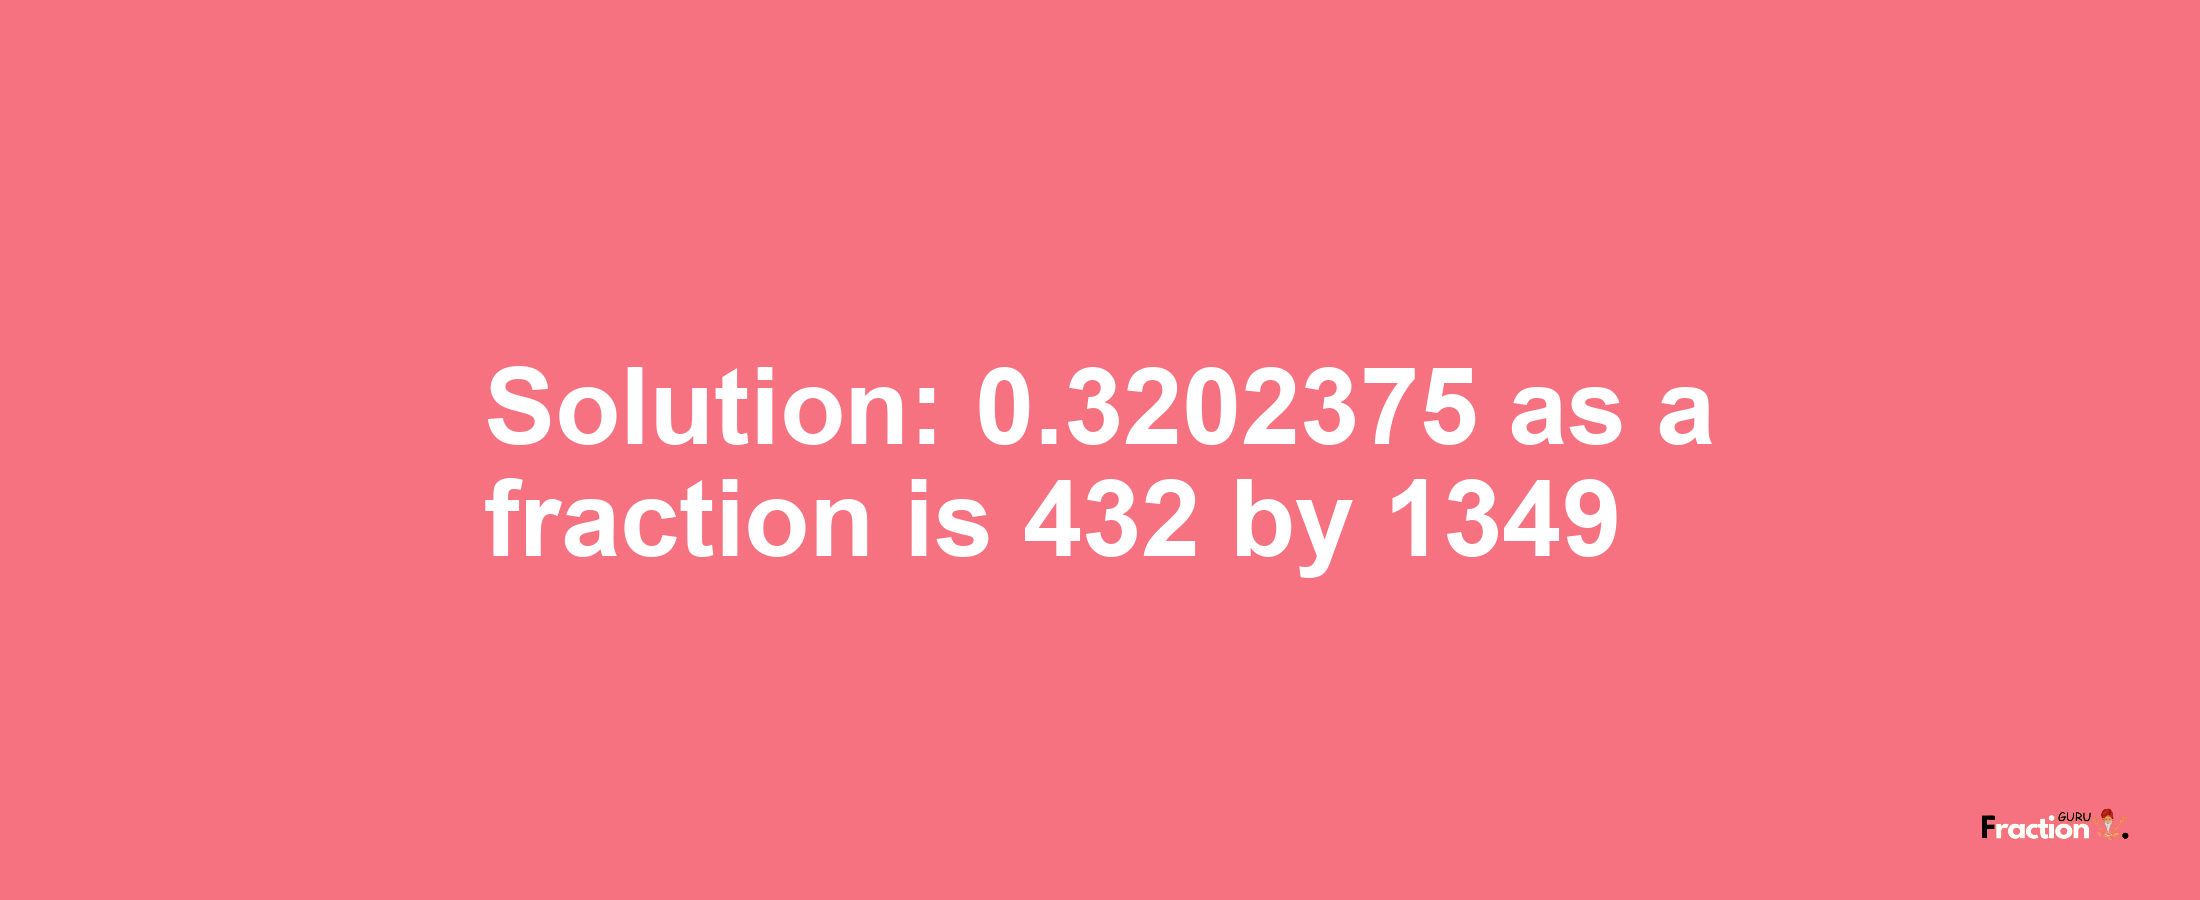 Solution:0.3202375 as a fraction is 432/1349